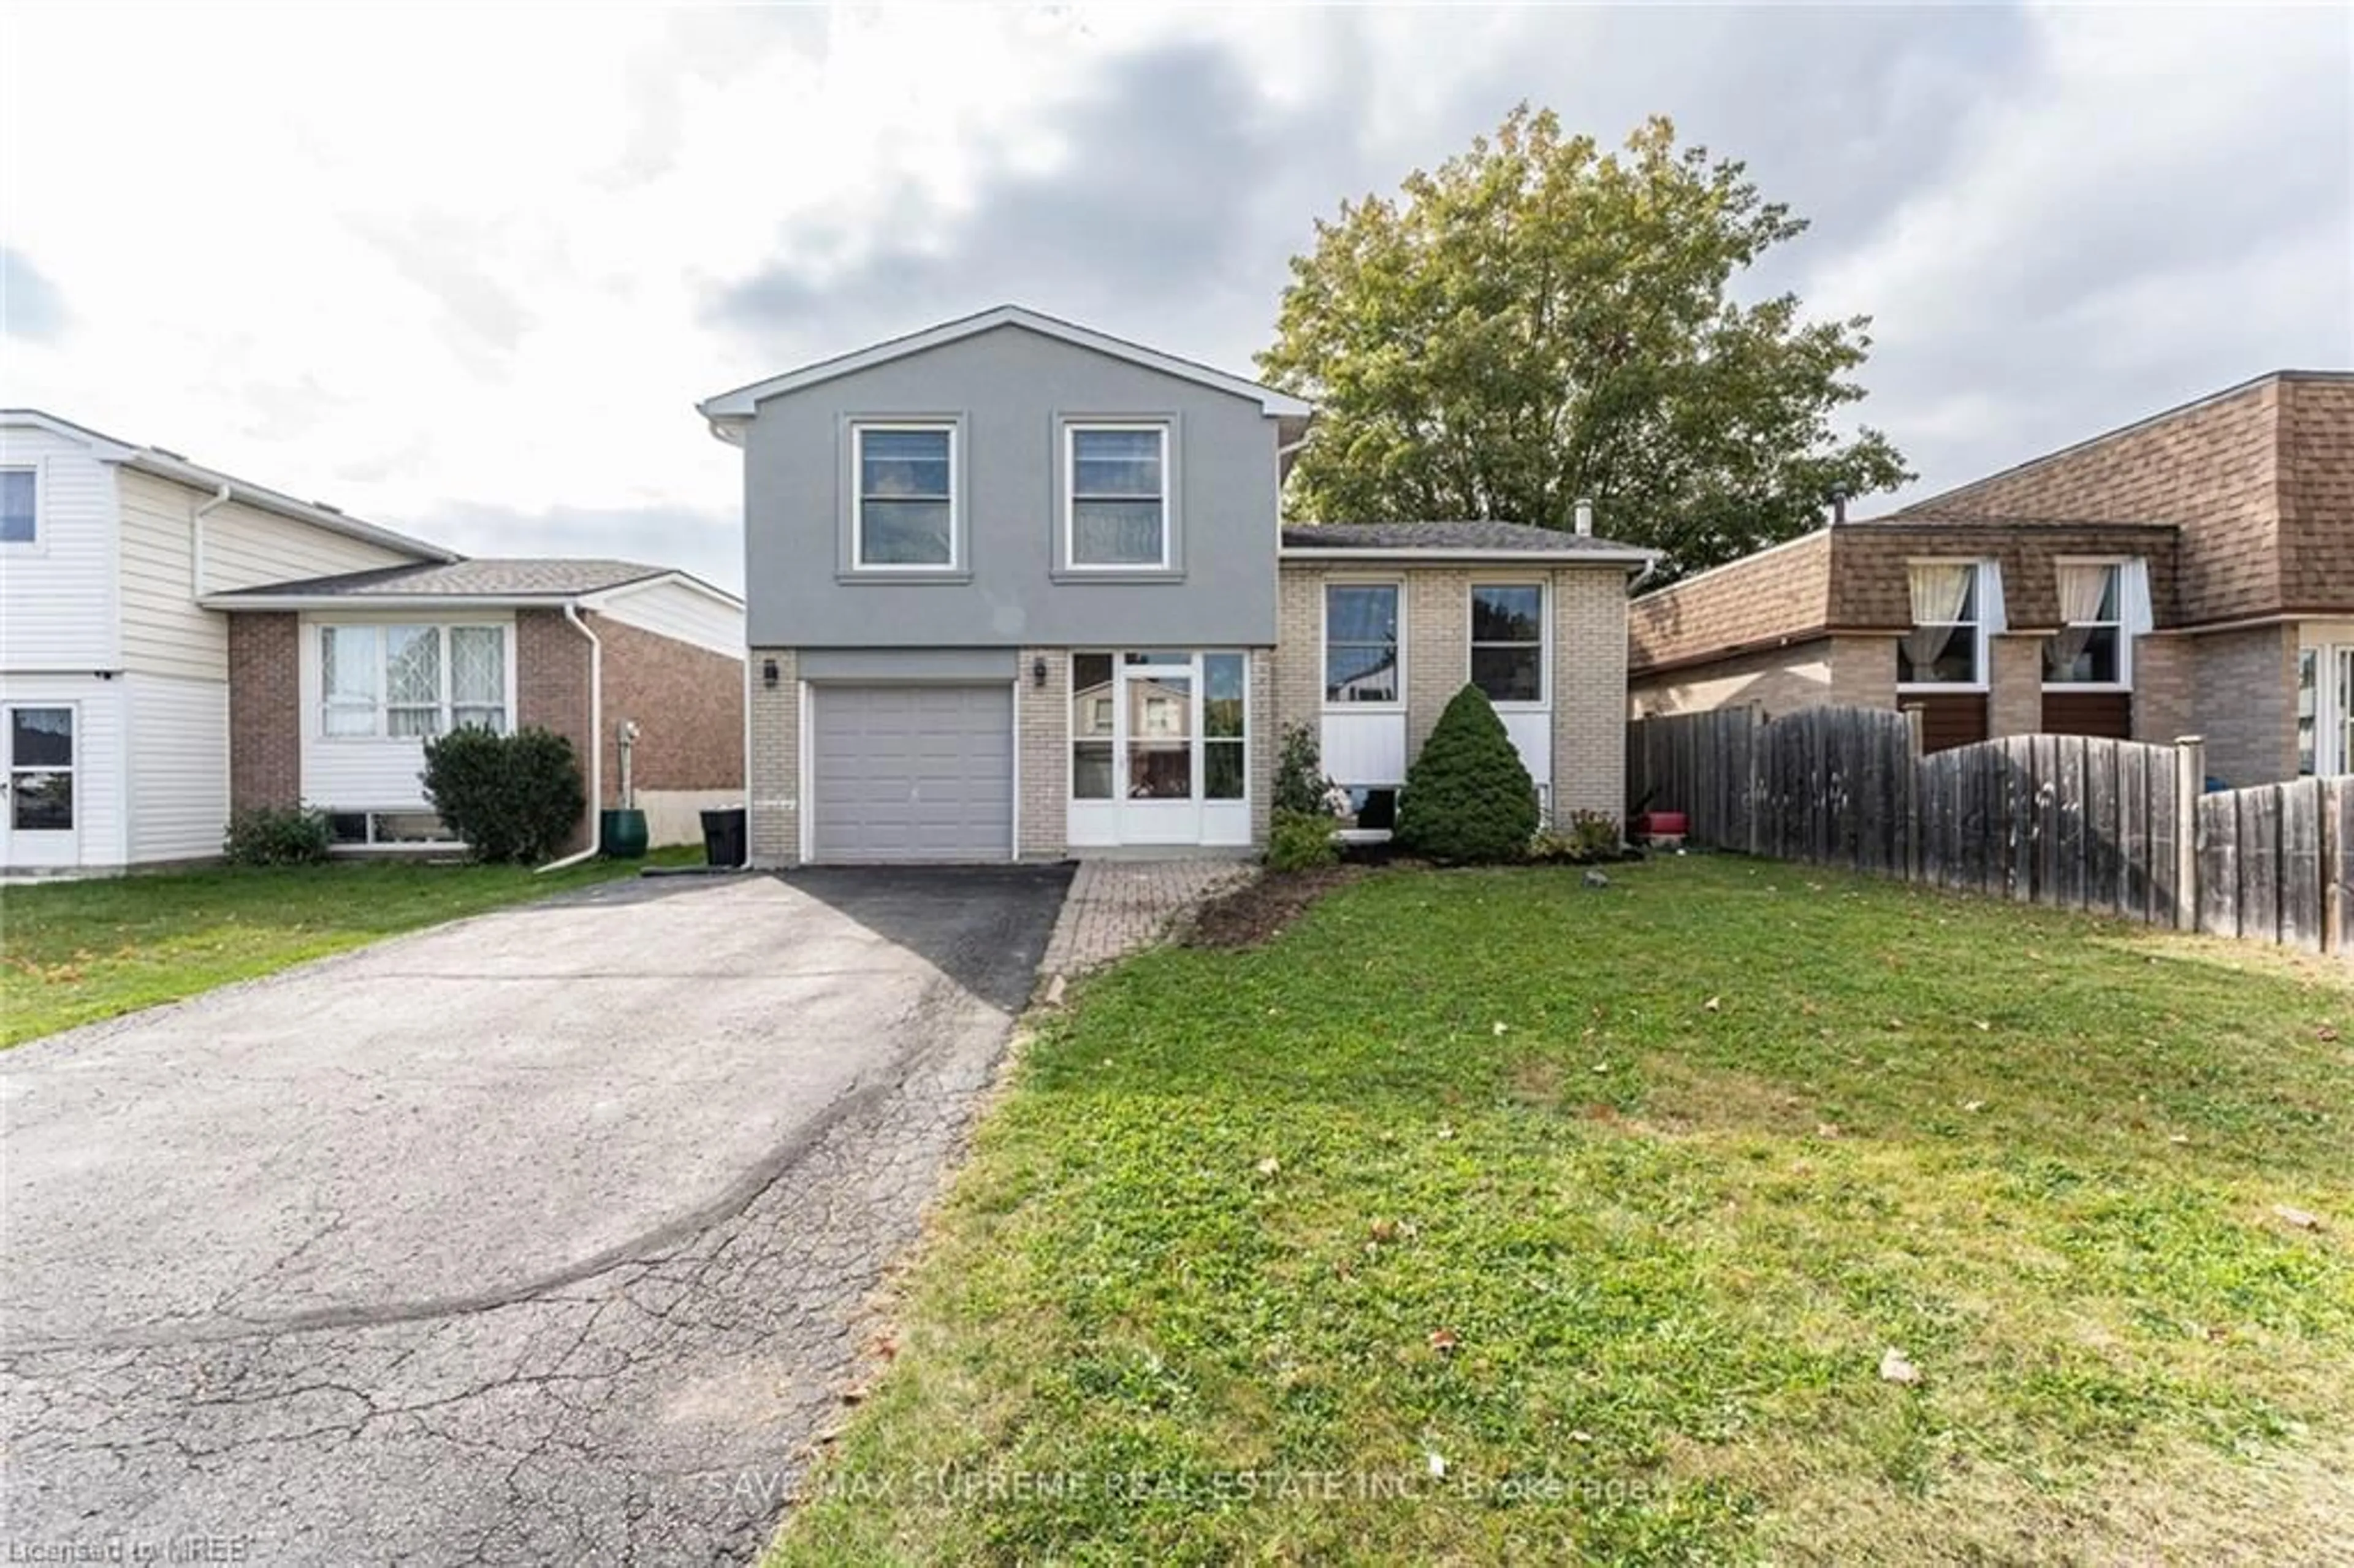 Frontside or backside of a home for 1756 Briarwood Dr, Cambridge Ontario N3H 5A7